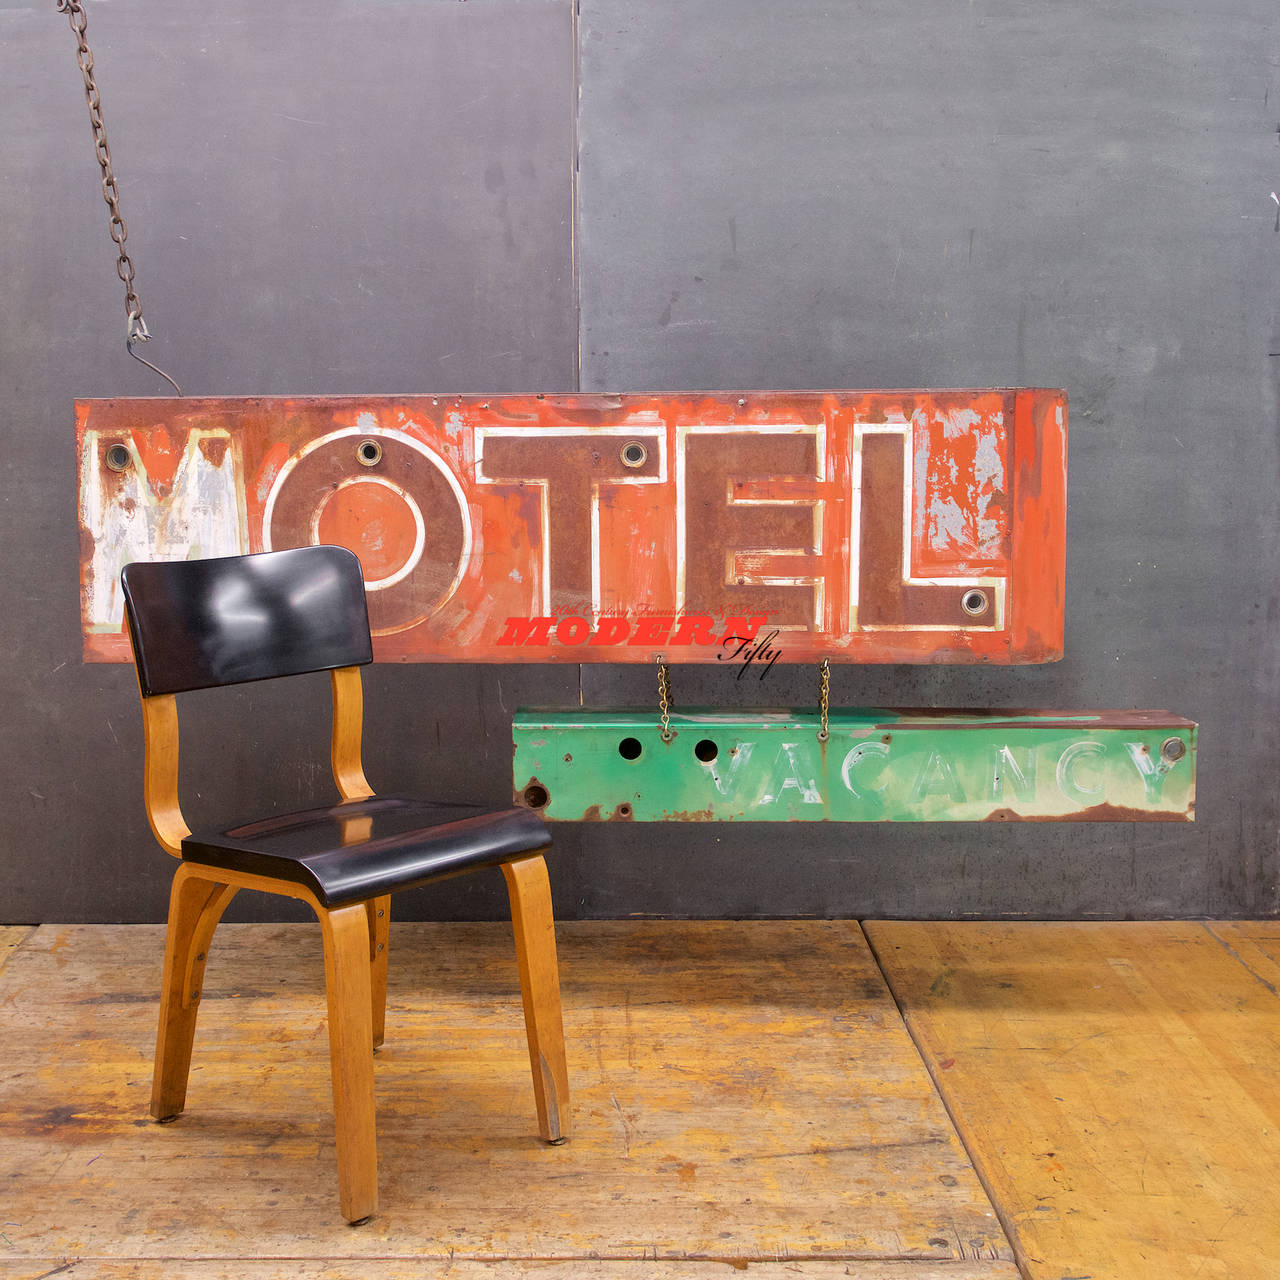 Both Neon signs have been cleaned and gutted. Shown for photo with Vacancy hanging from Motel Sign. However, these can be displayed any way you want, separated etc., or vacancy sign could be bolted directly to the underside of the Motel Sign. These